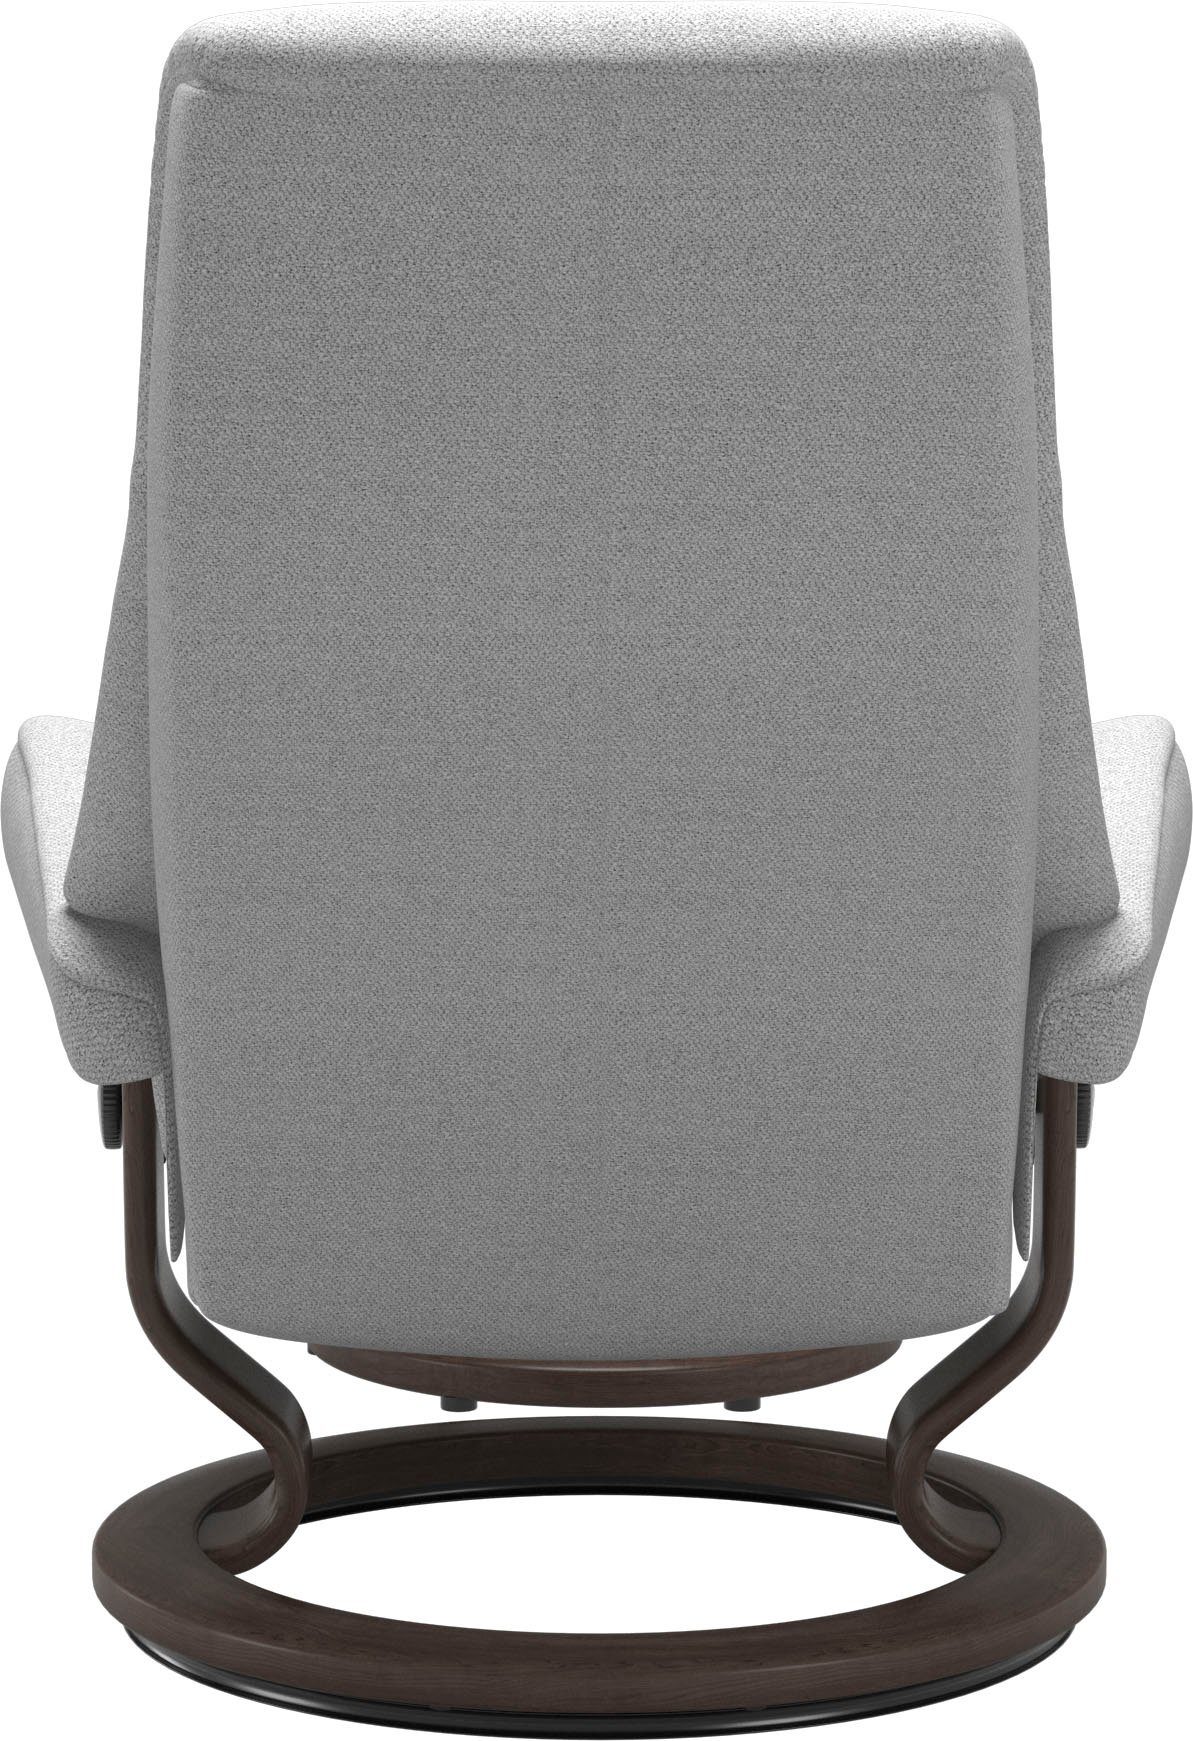 Stressless® Base, mit Größe View, Wenge L,Gestell Classic Relaxsessel